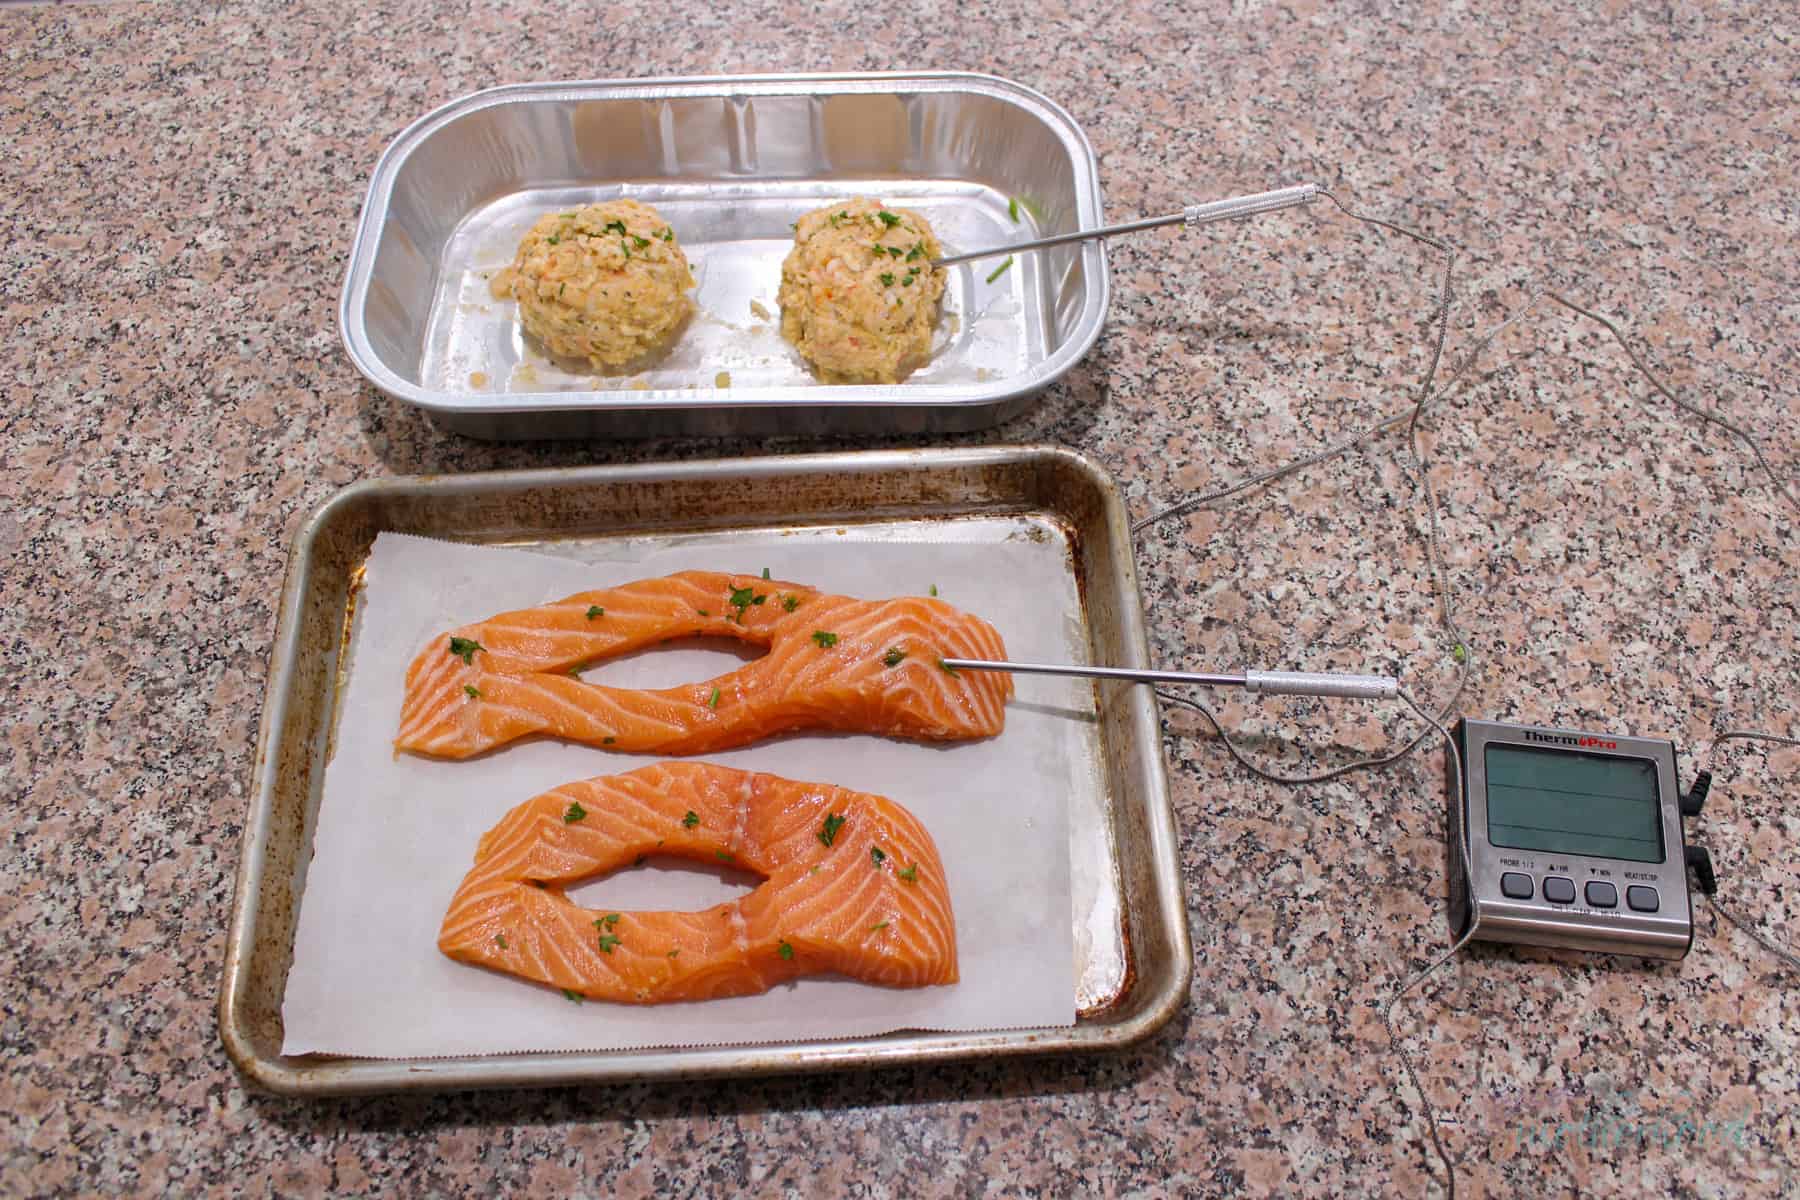 Salmon on baking sheet and stuffing in original container with temperature probes in one of each